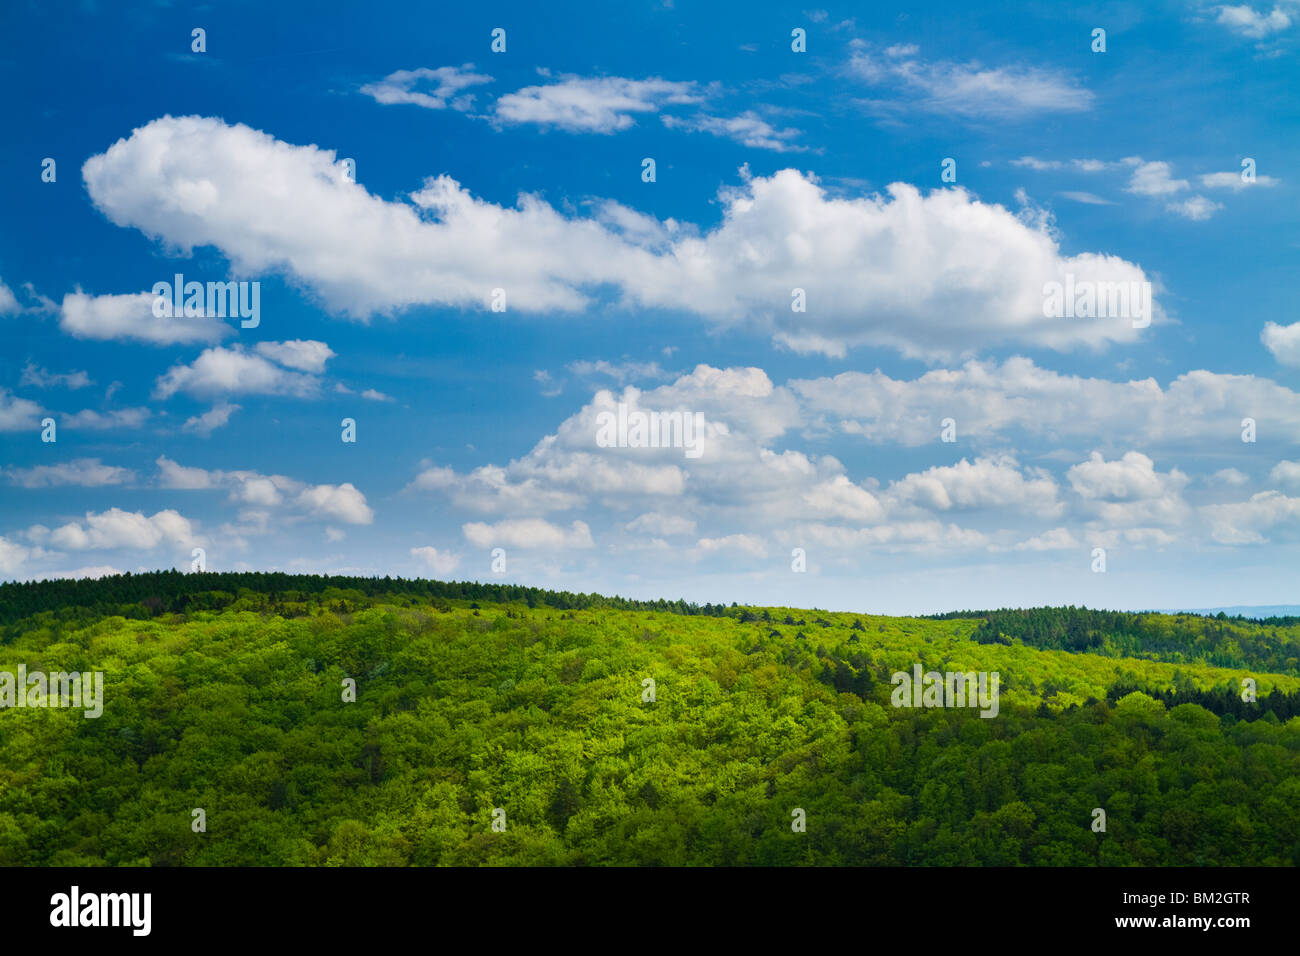 Beautiful green trees in spring with blue sky above. Stock Photo